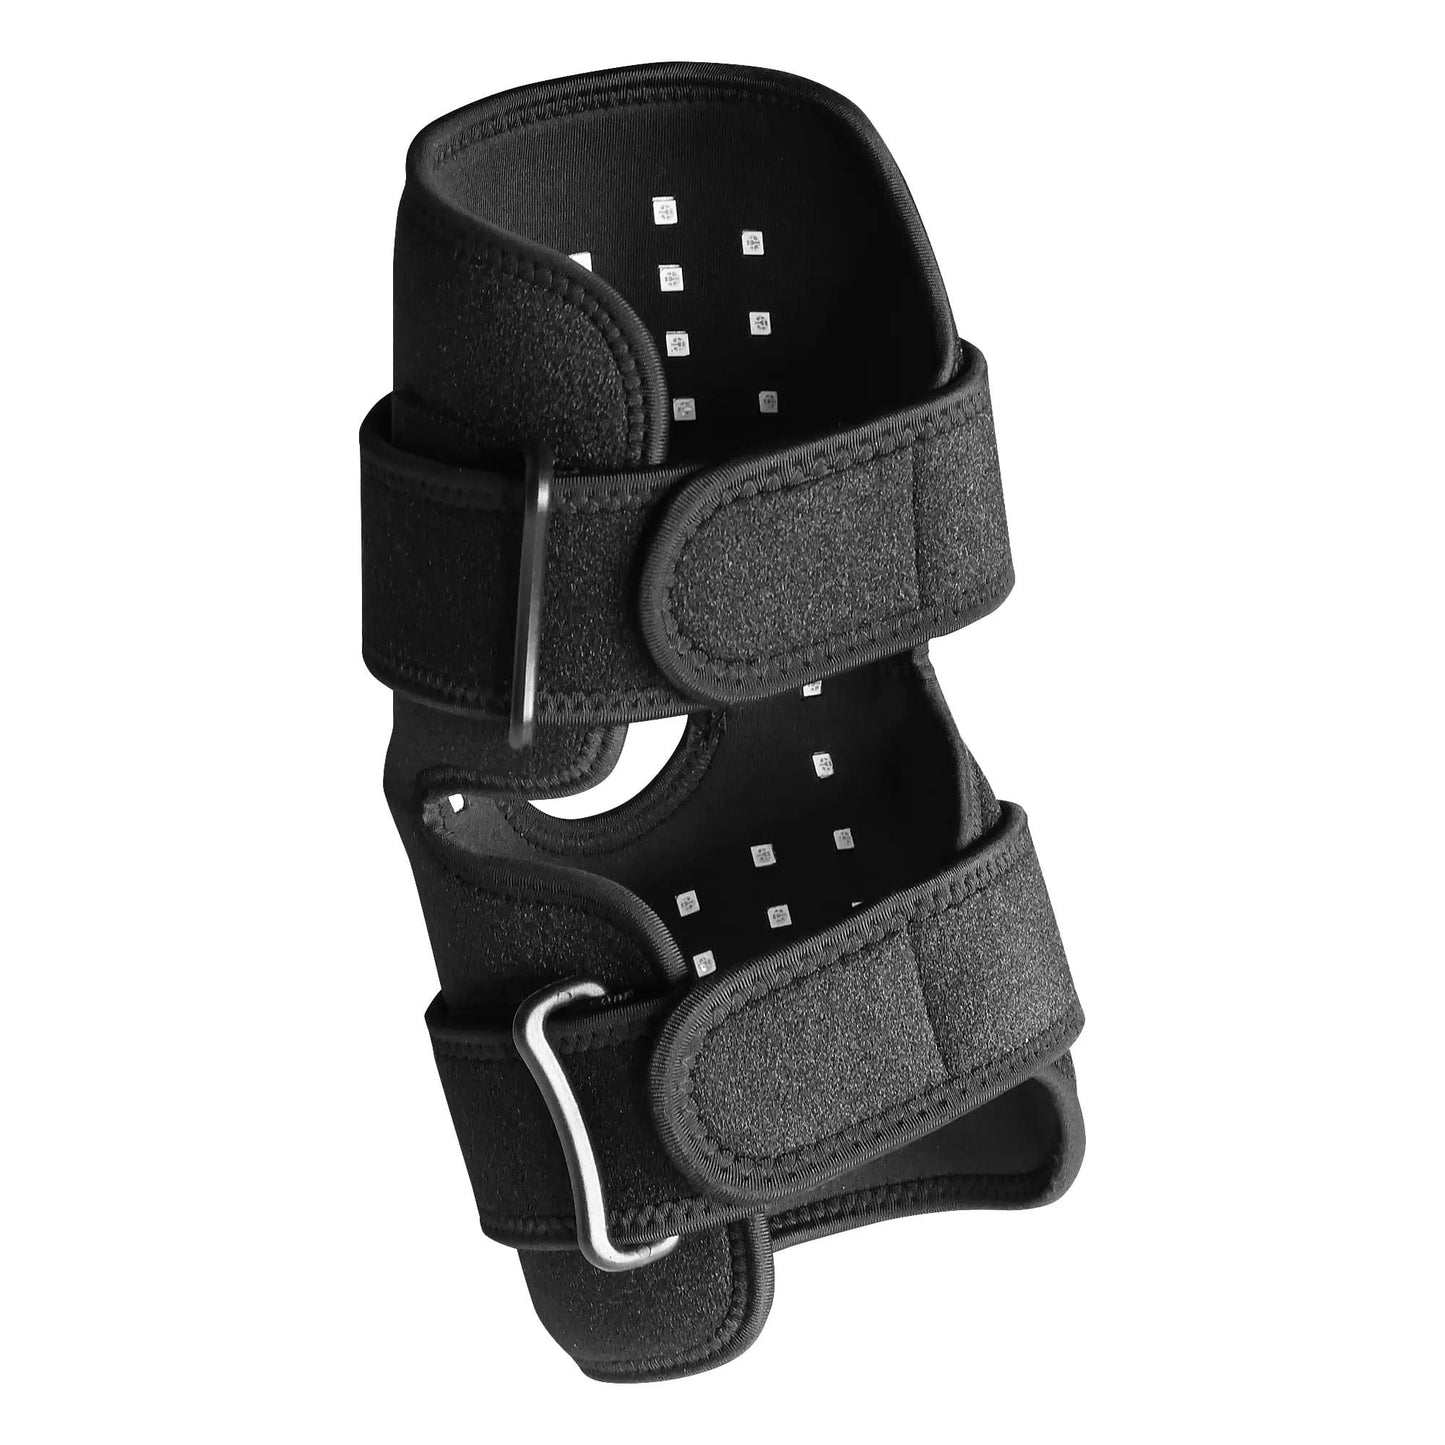 Red Light Therapy Knee Pad for Joint Pain